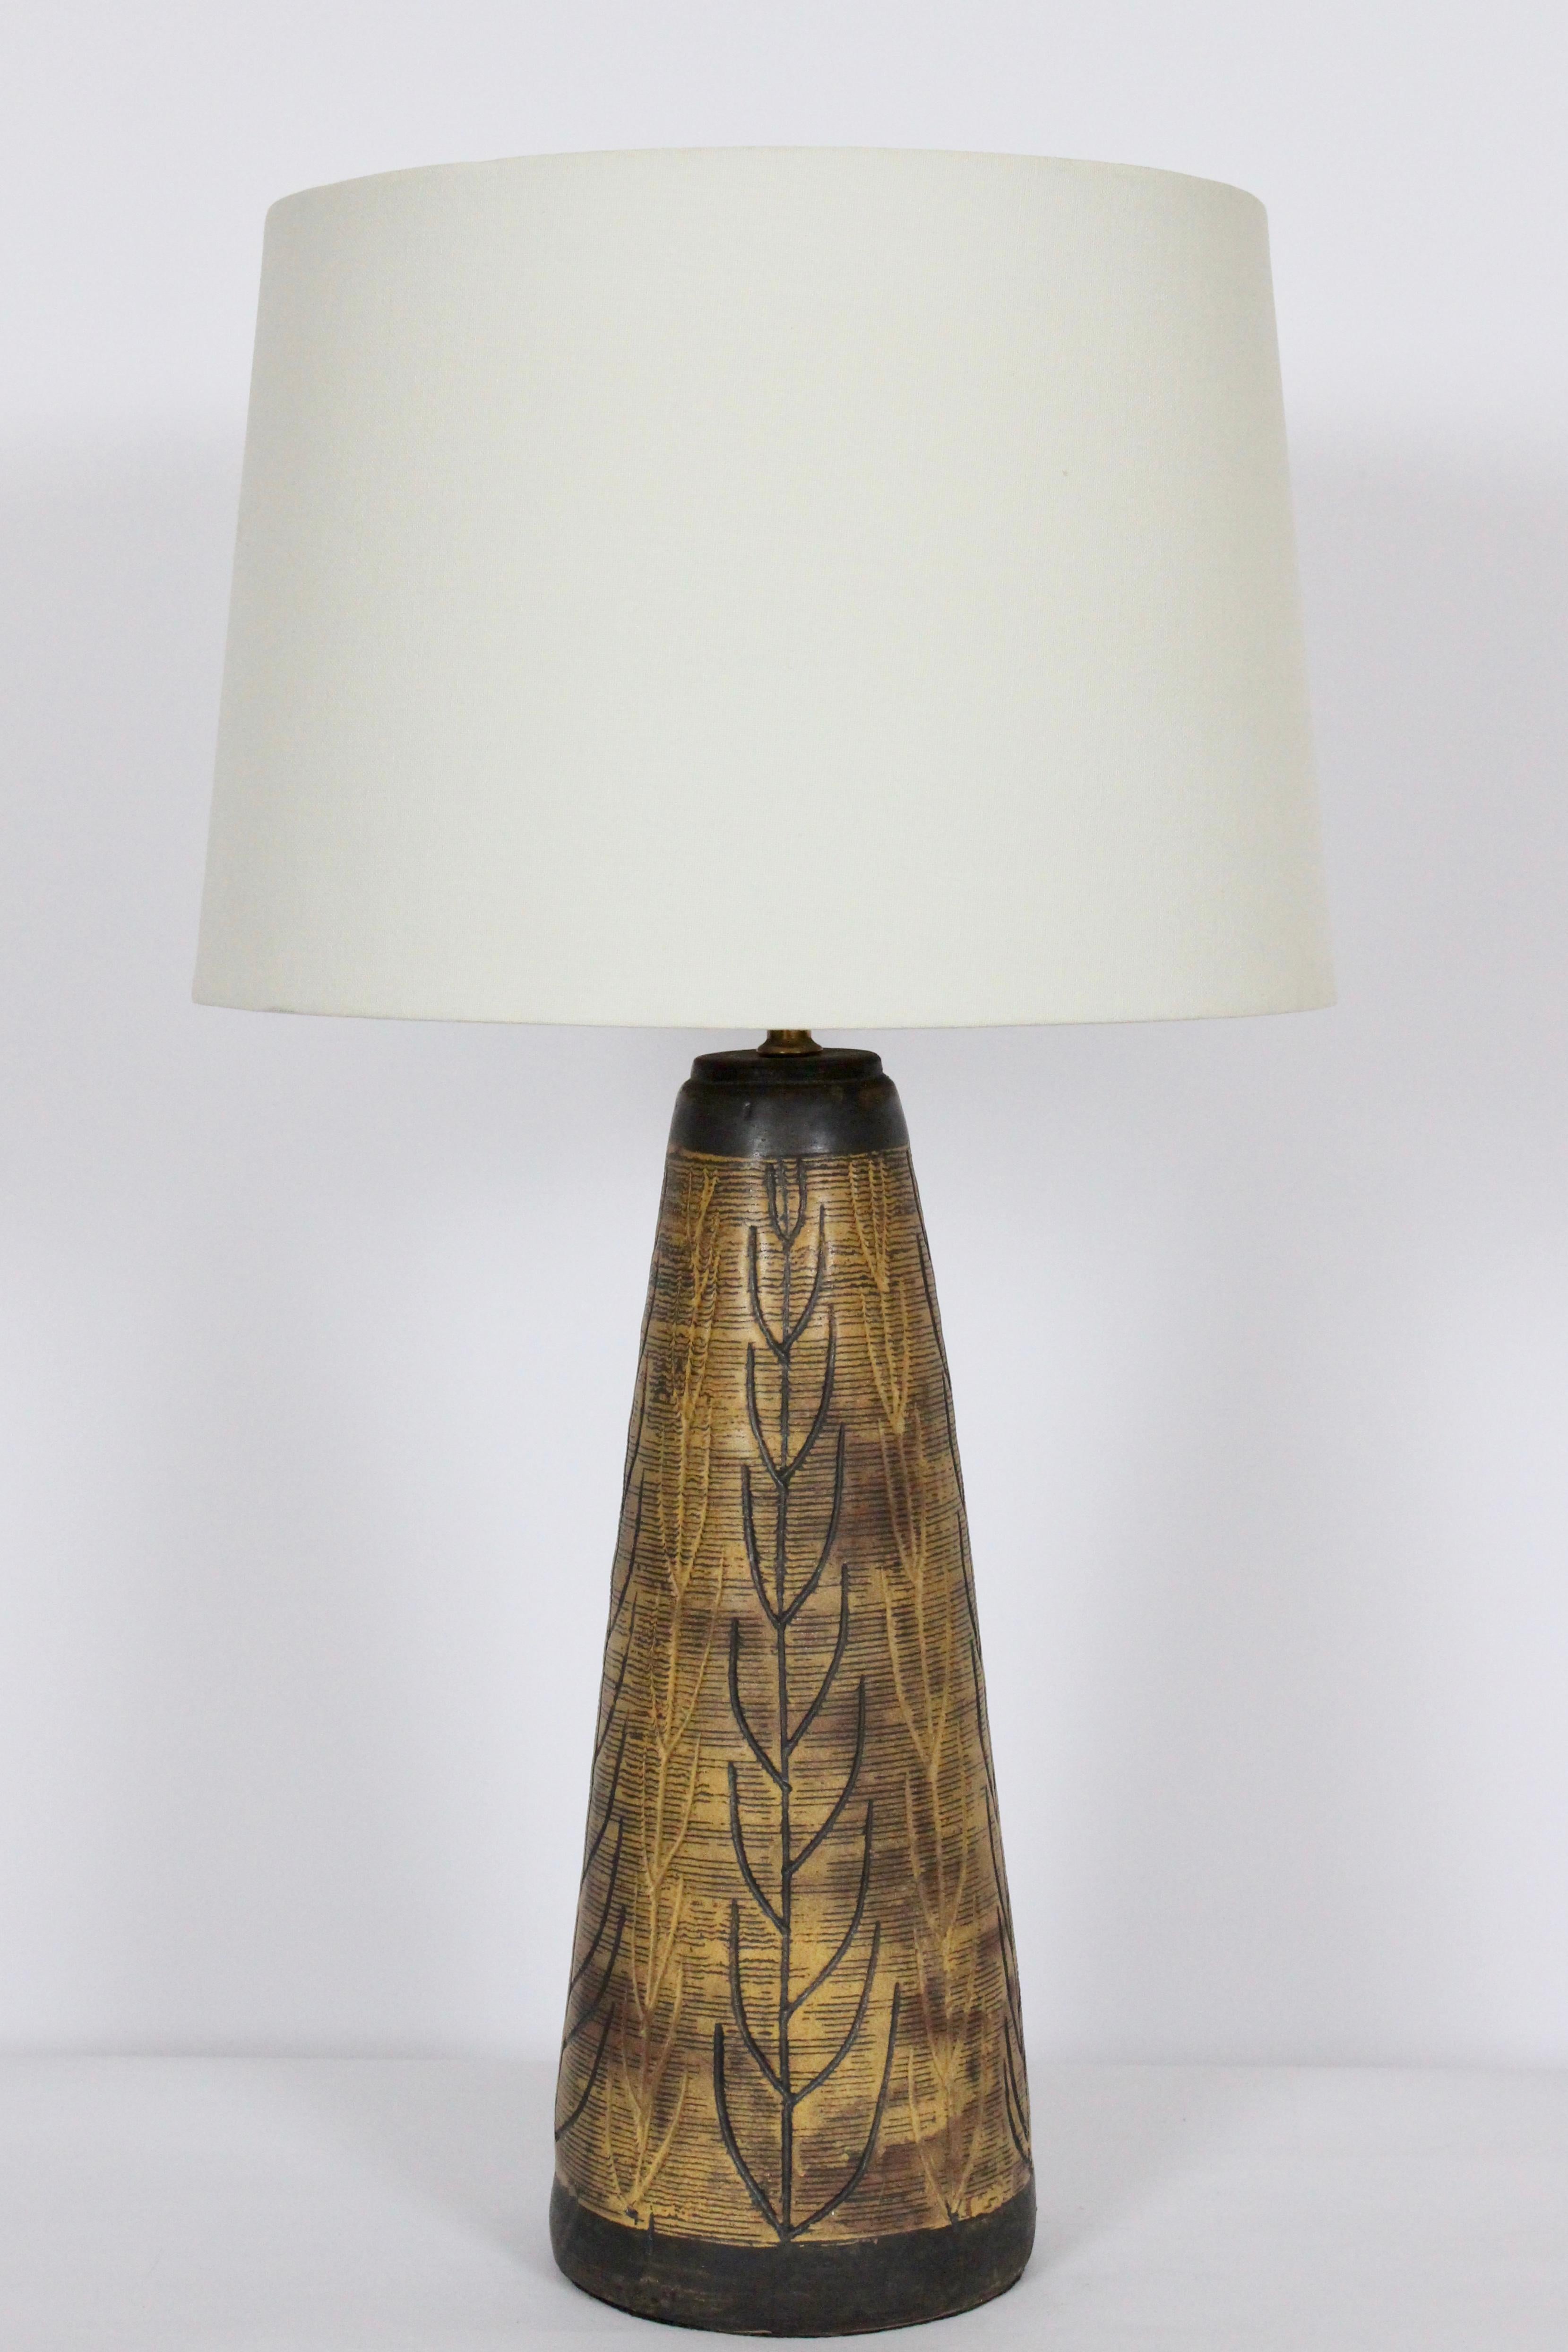 Large Vermont Potter Nancy Wickham Boyd for Design-Technics hand carved organic modern stoneware lamp. Featuring a glazed hand crafted tapered cylindrical ceramic form with leaf and branch designs in mustard, olive and earthen natural tones and